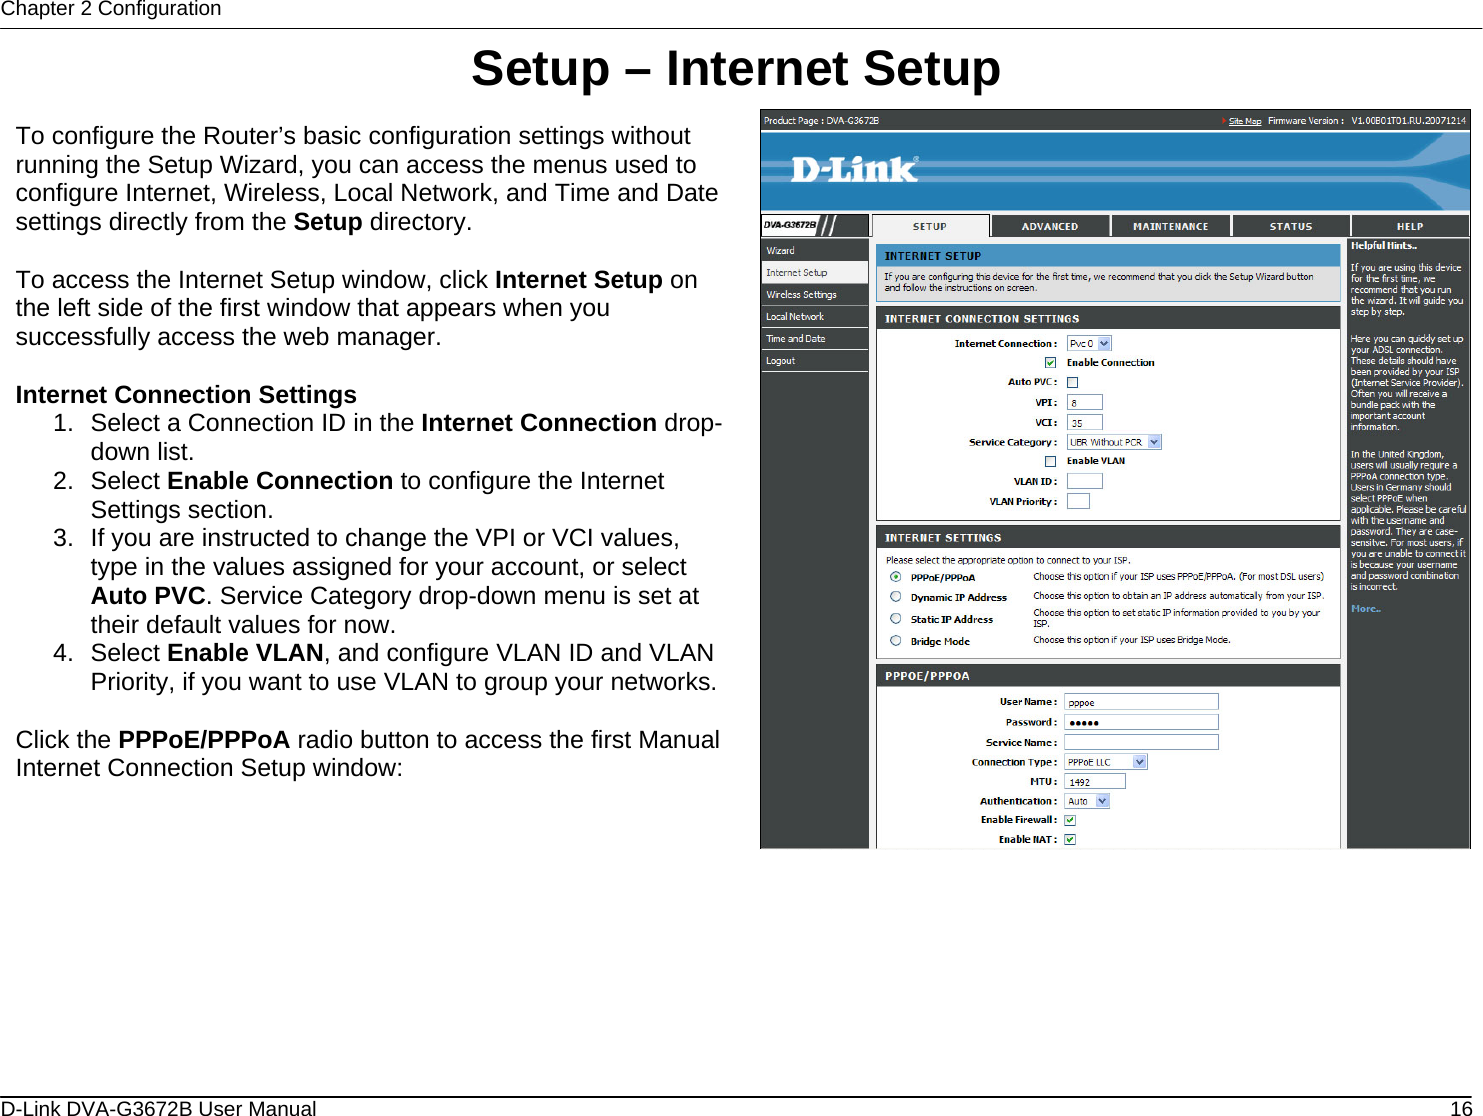 Chapter 2 Configuration Setup – Internet Setup  To configure the Router’s basic configuration settings without running the Setup Wizard, you can access the menus used to configure Internet, Wireless, Local Network, and Time and Date settings directly from the Setup directory.   To access the Internet Setup window, click Internet Setup on the left side of the first window that appears when you successfully access the web manager.   Internet Connection Settings 1.  Select a Connection ID in the Internet Connection drop-down list. 2. Select Enable Connection to configure the Internet Settings section. 3.  If you are instructed to change the VPI or VCI values, type in the values assigned for your account, or select Auto PVC. Service Category drop-down menu is set at their default values for now. 4. Select Enable VLAN, and configure VLAN ID and VLAN Priority, if you want to use VLAN to group your networks. Click the PPPoE/PPPoA radio button to access the first Manual Internet Connection Setup window:        D-Link DVA-G3672B User Manual  16